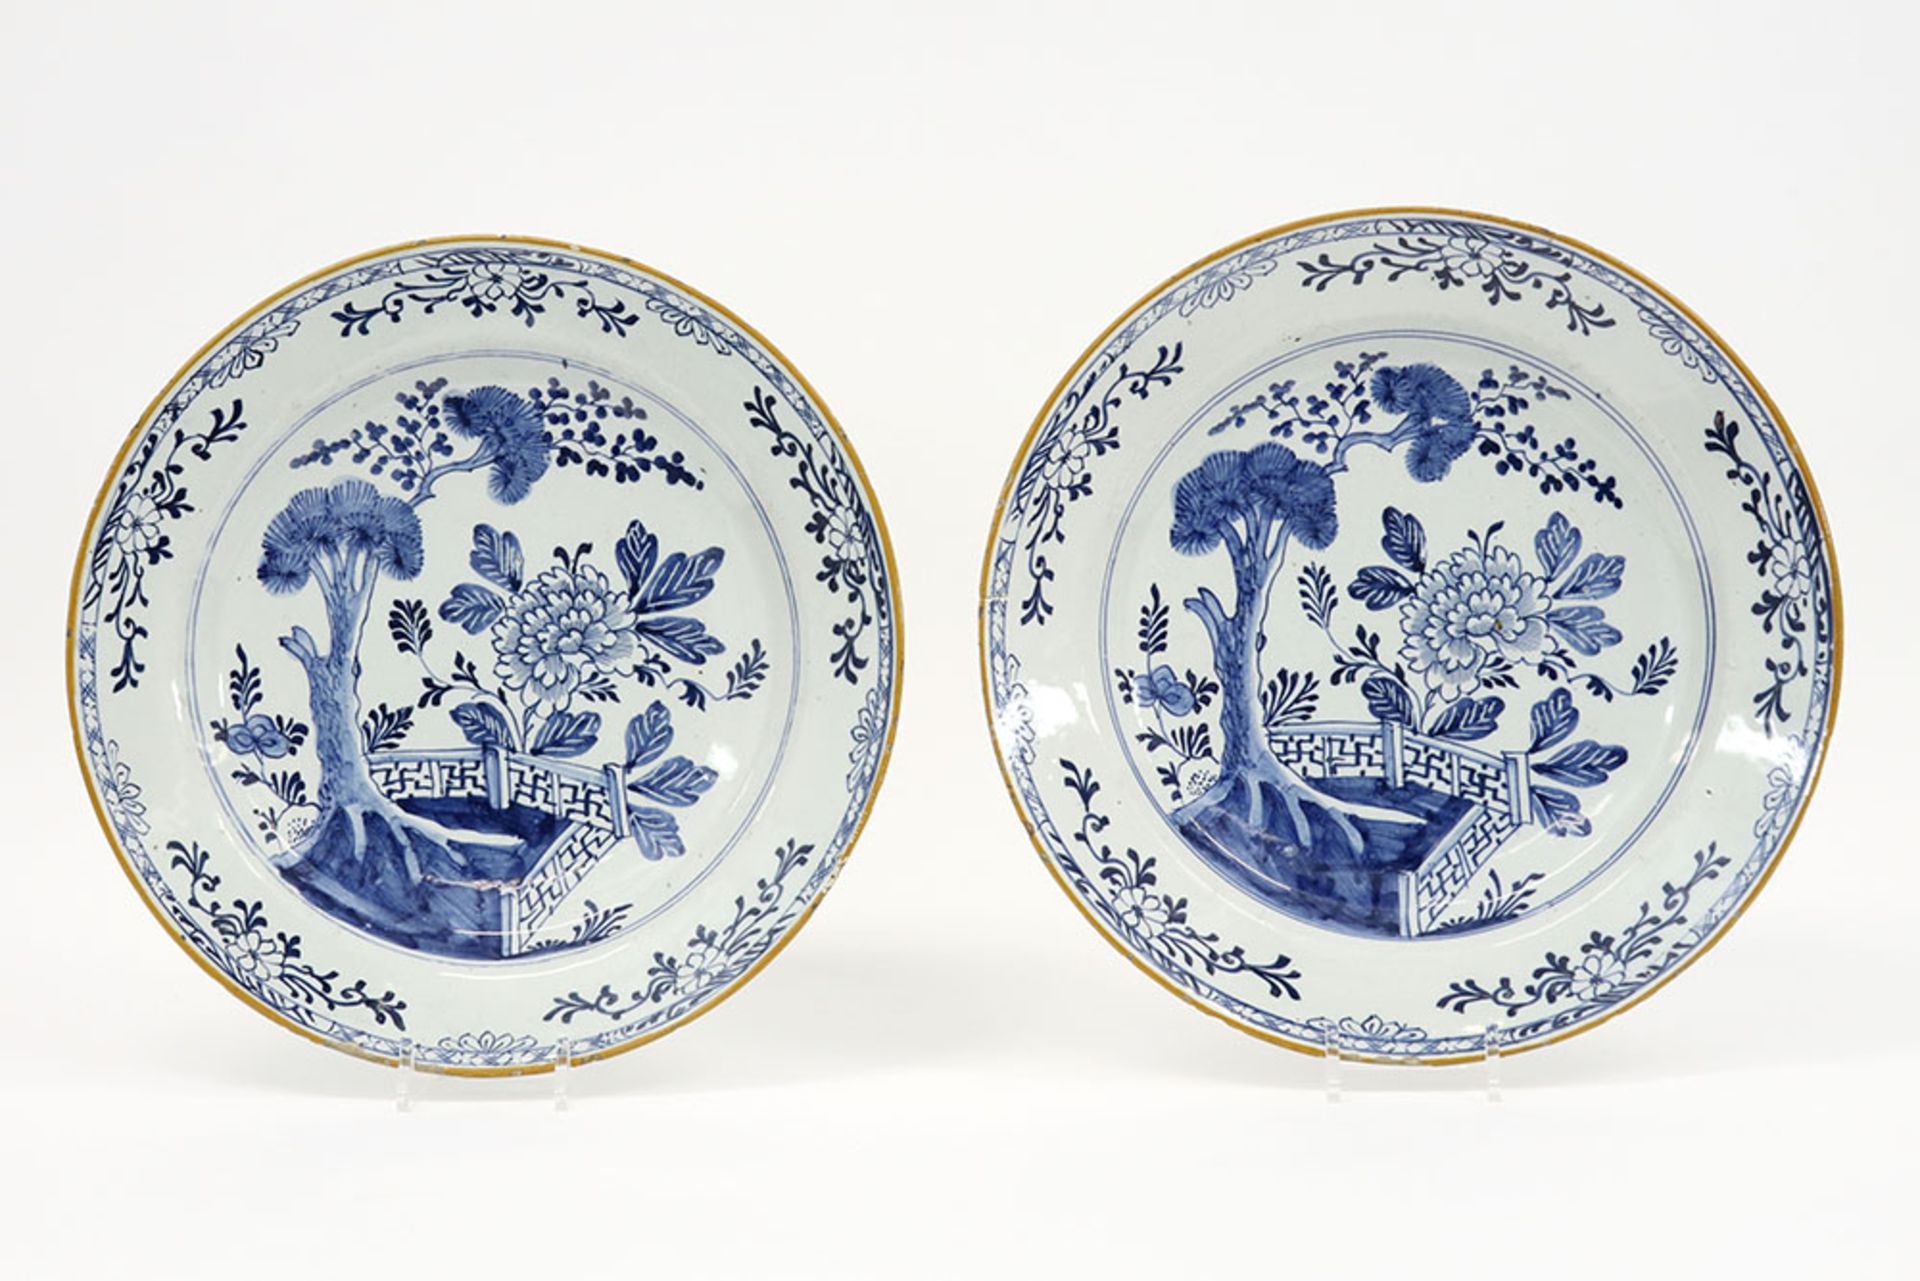 pair of 18th Cent. dishes in marked ceramic from Delft with a blue-white garden decor || Paar